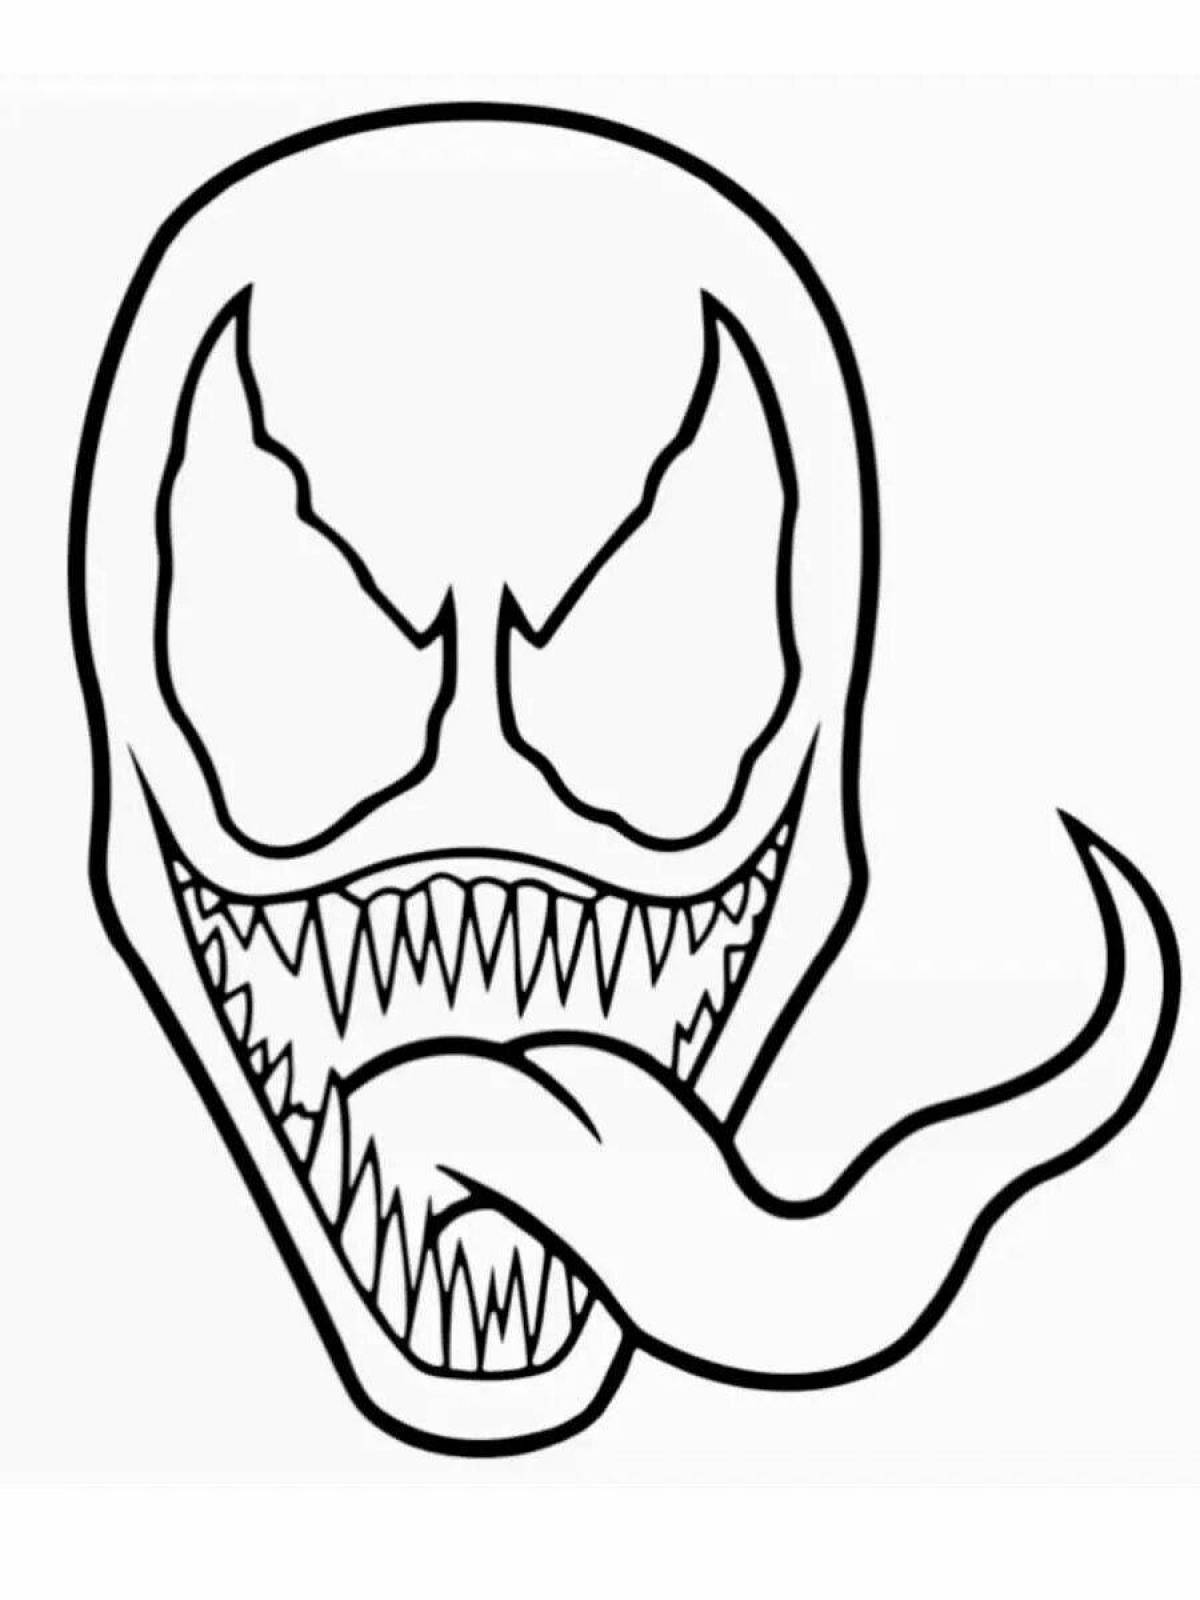 Venom 2 awesome coloring book